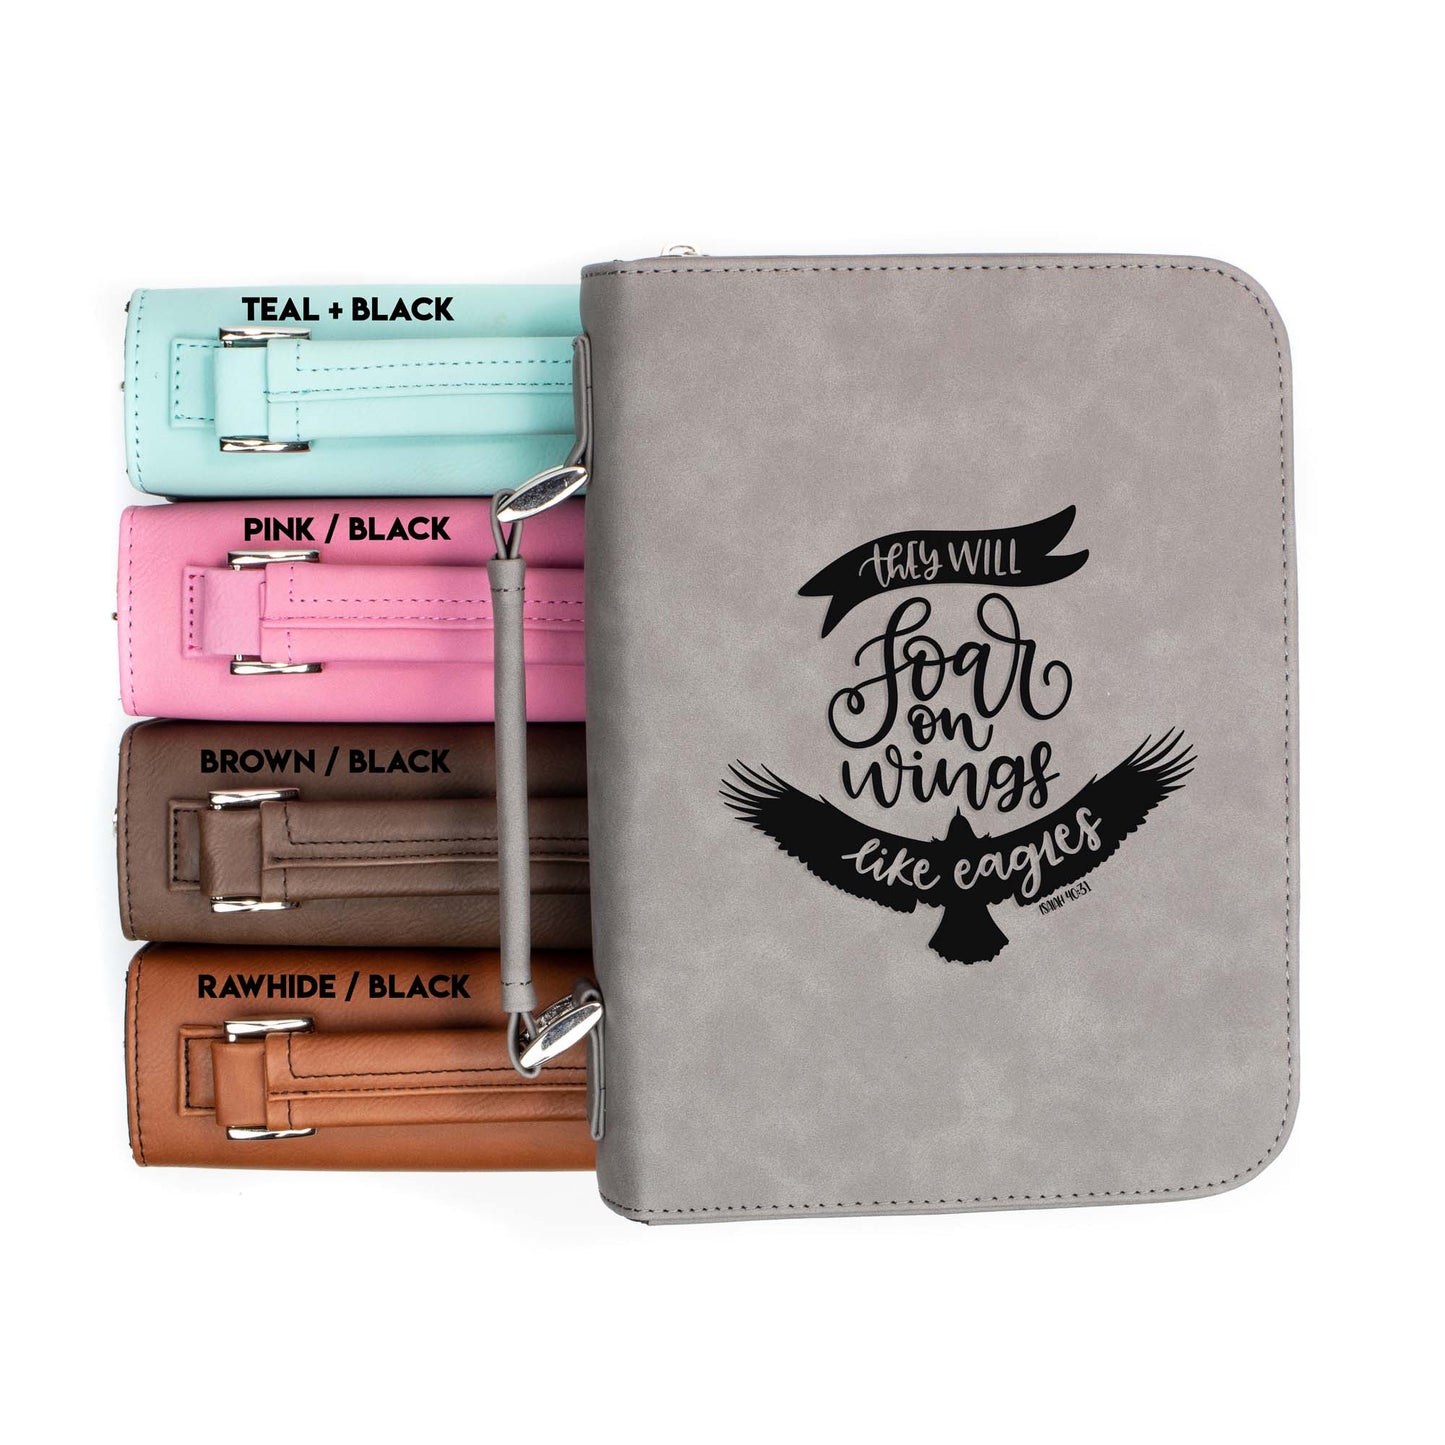 They Will Soar on Wings Isaiah 40-31 Bible Cover | Faux Leather With Handle + Pockets